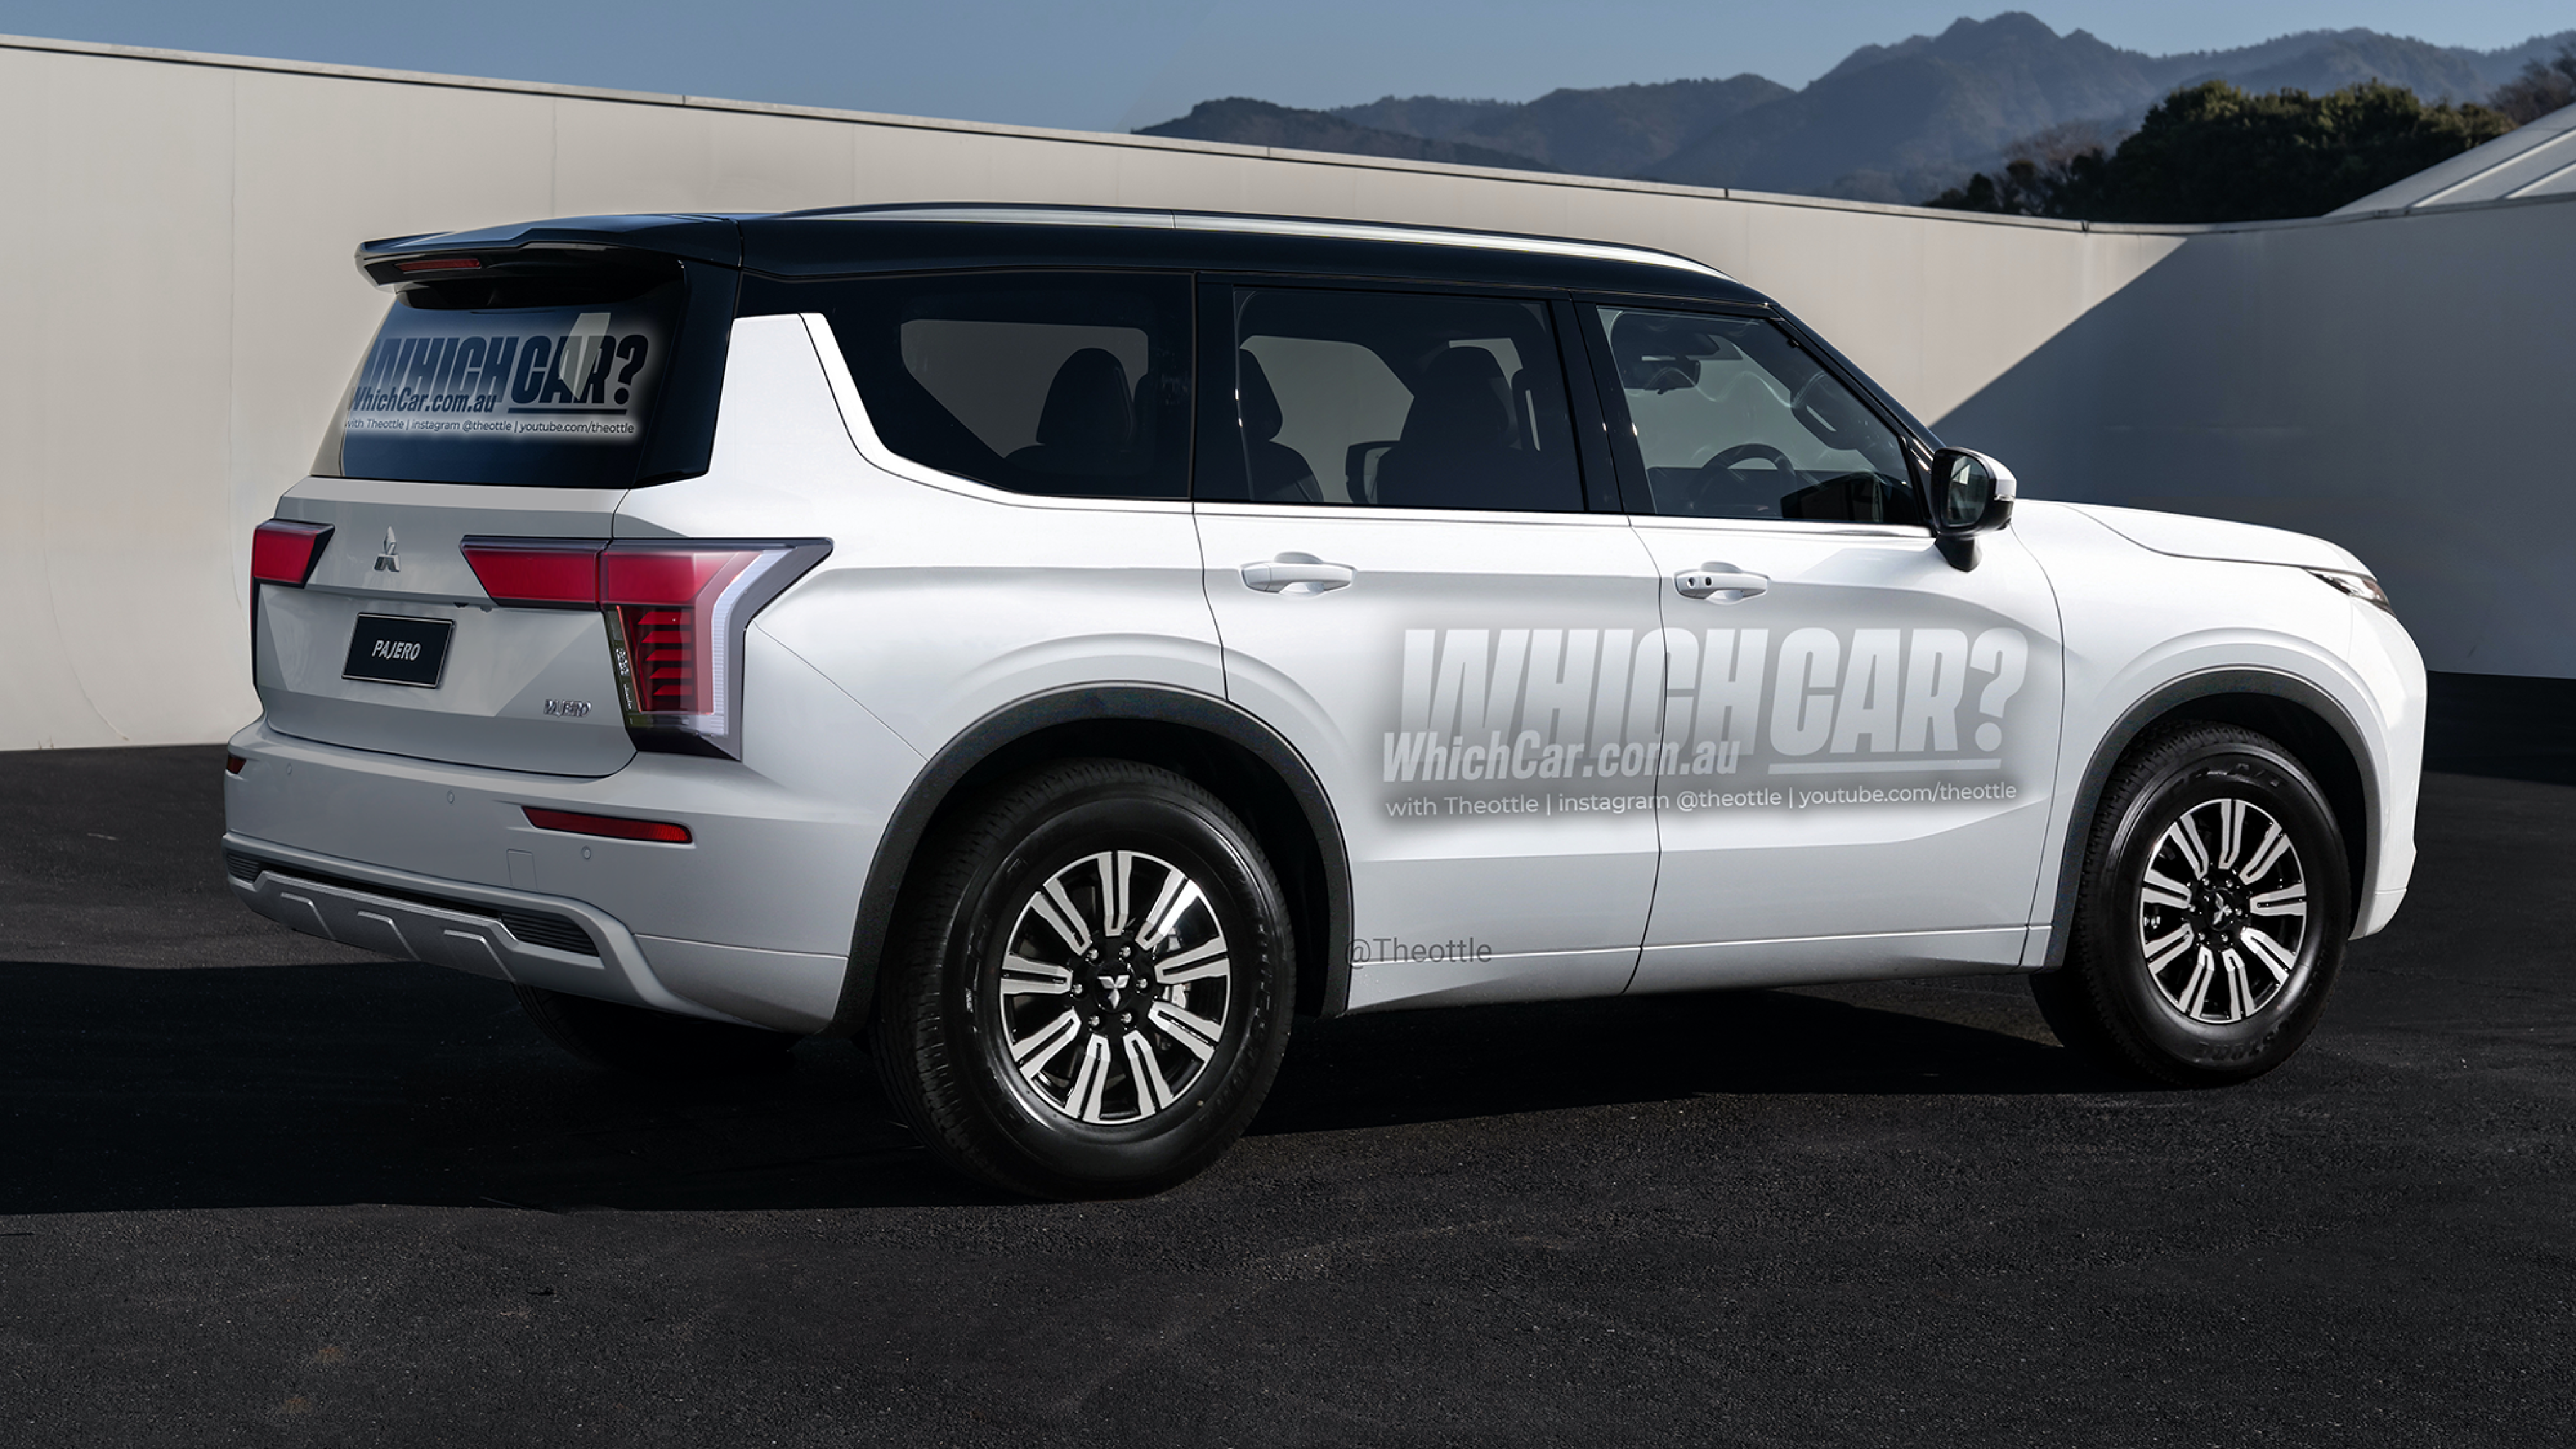 bf081f5d/2026 mitsubishi pajero rendered whichcar australia theottle 02 png